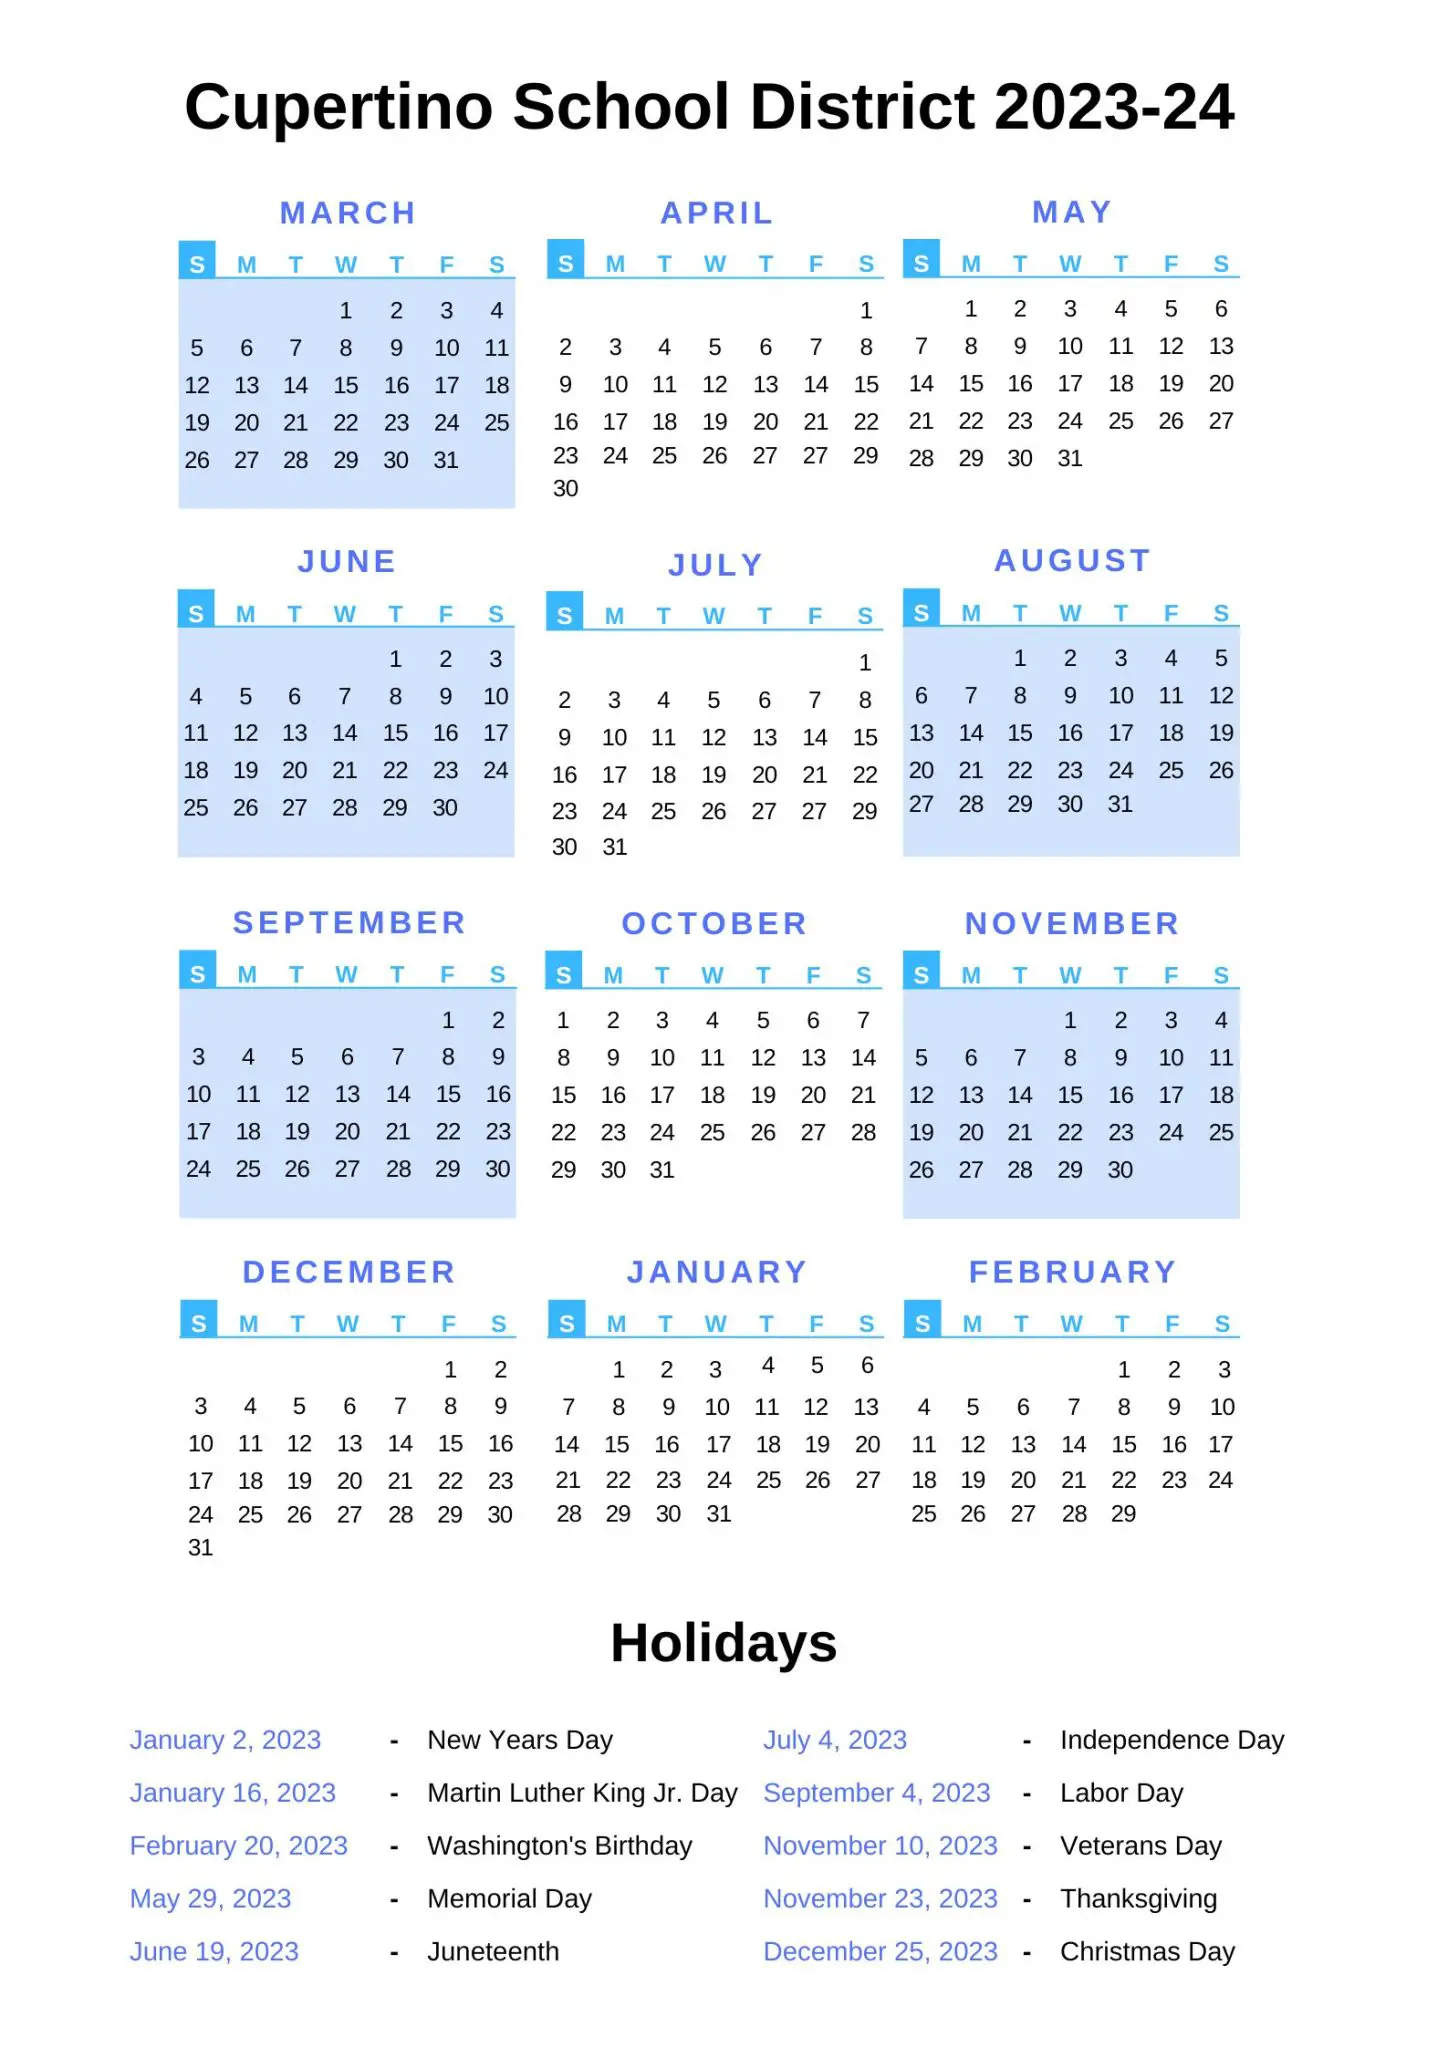 Cupertino School District Calendar 202324 With Holidays